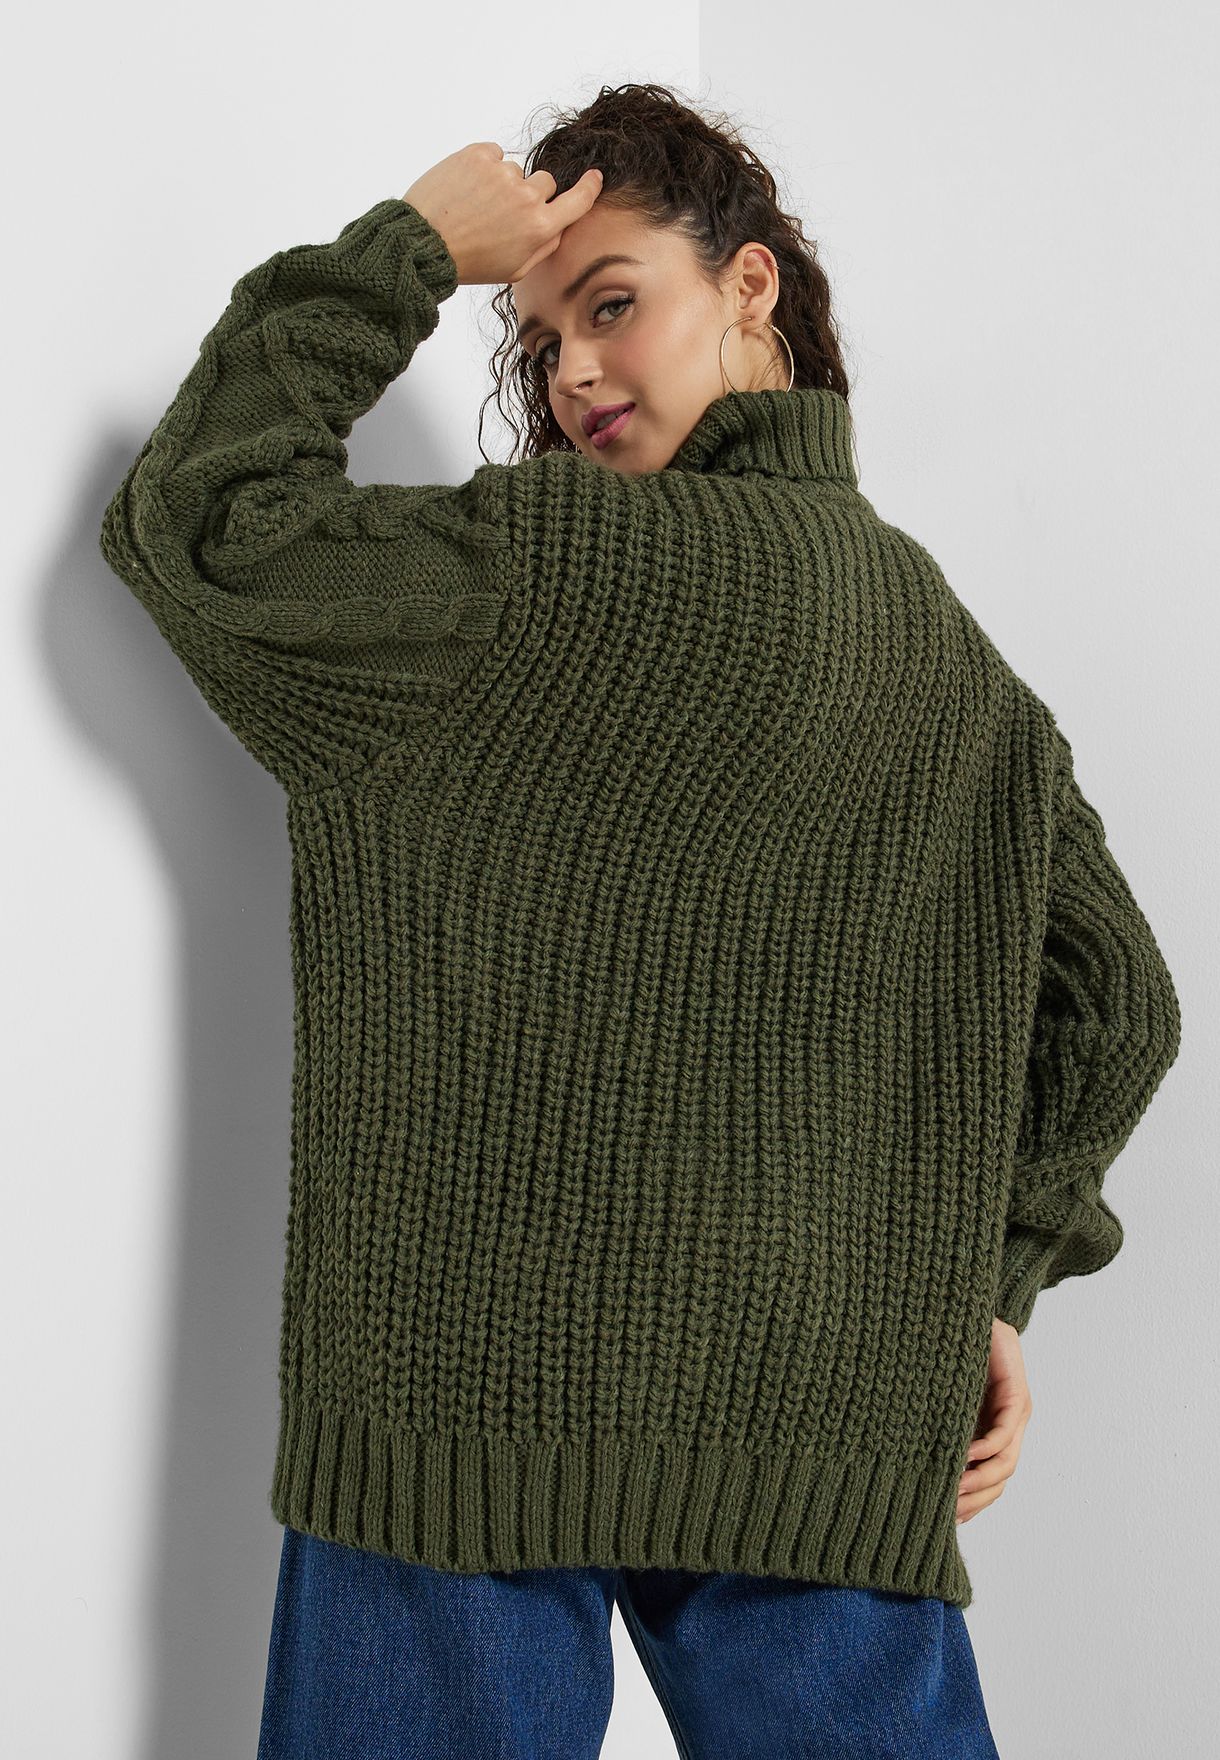 Turtle Neck Knitted Sweater